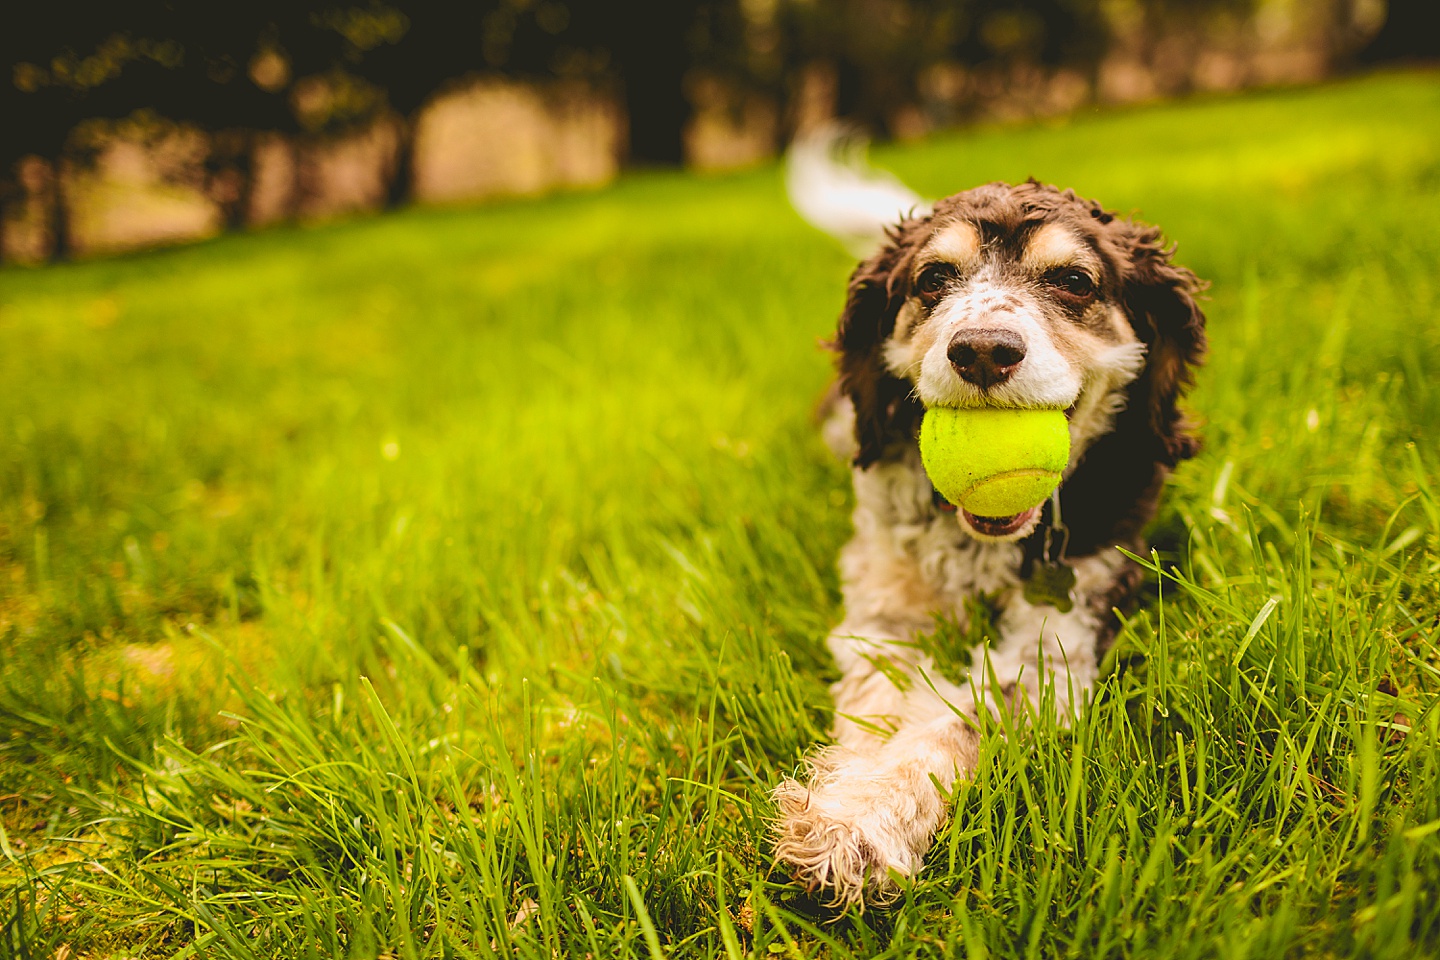 Dog with tennis ball in his mouth